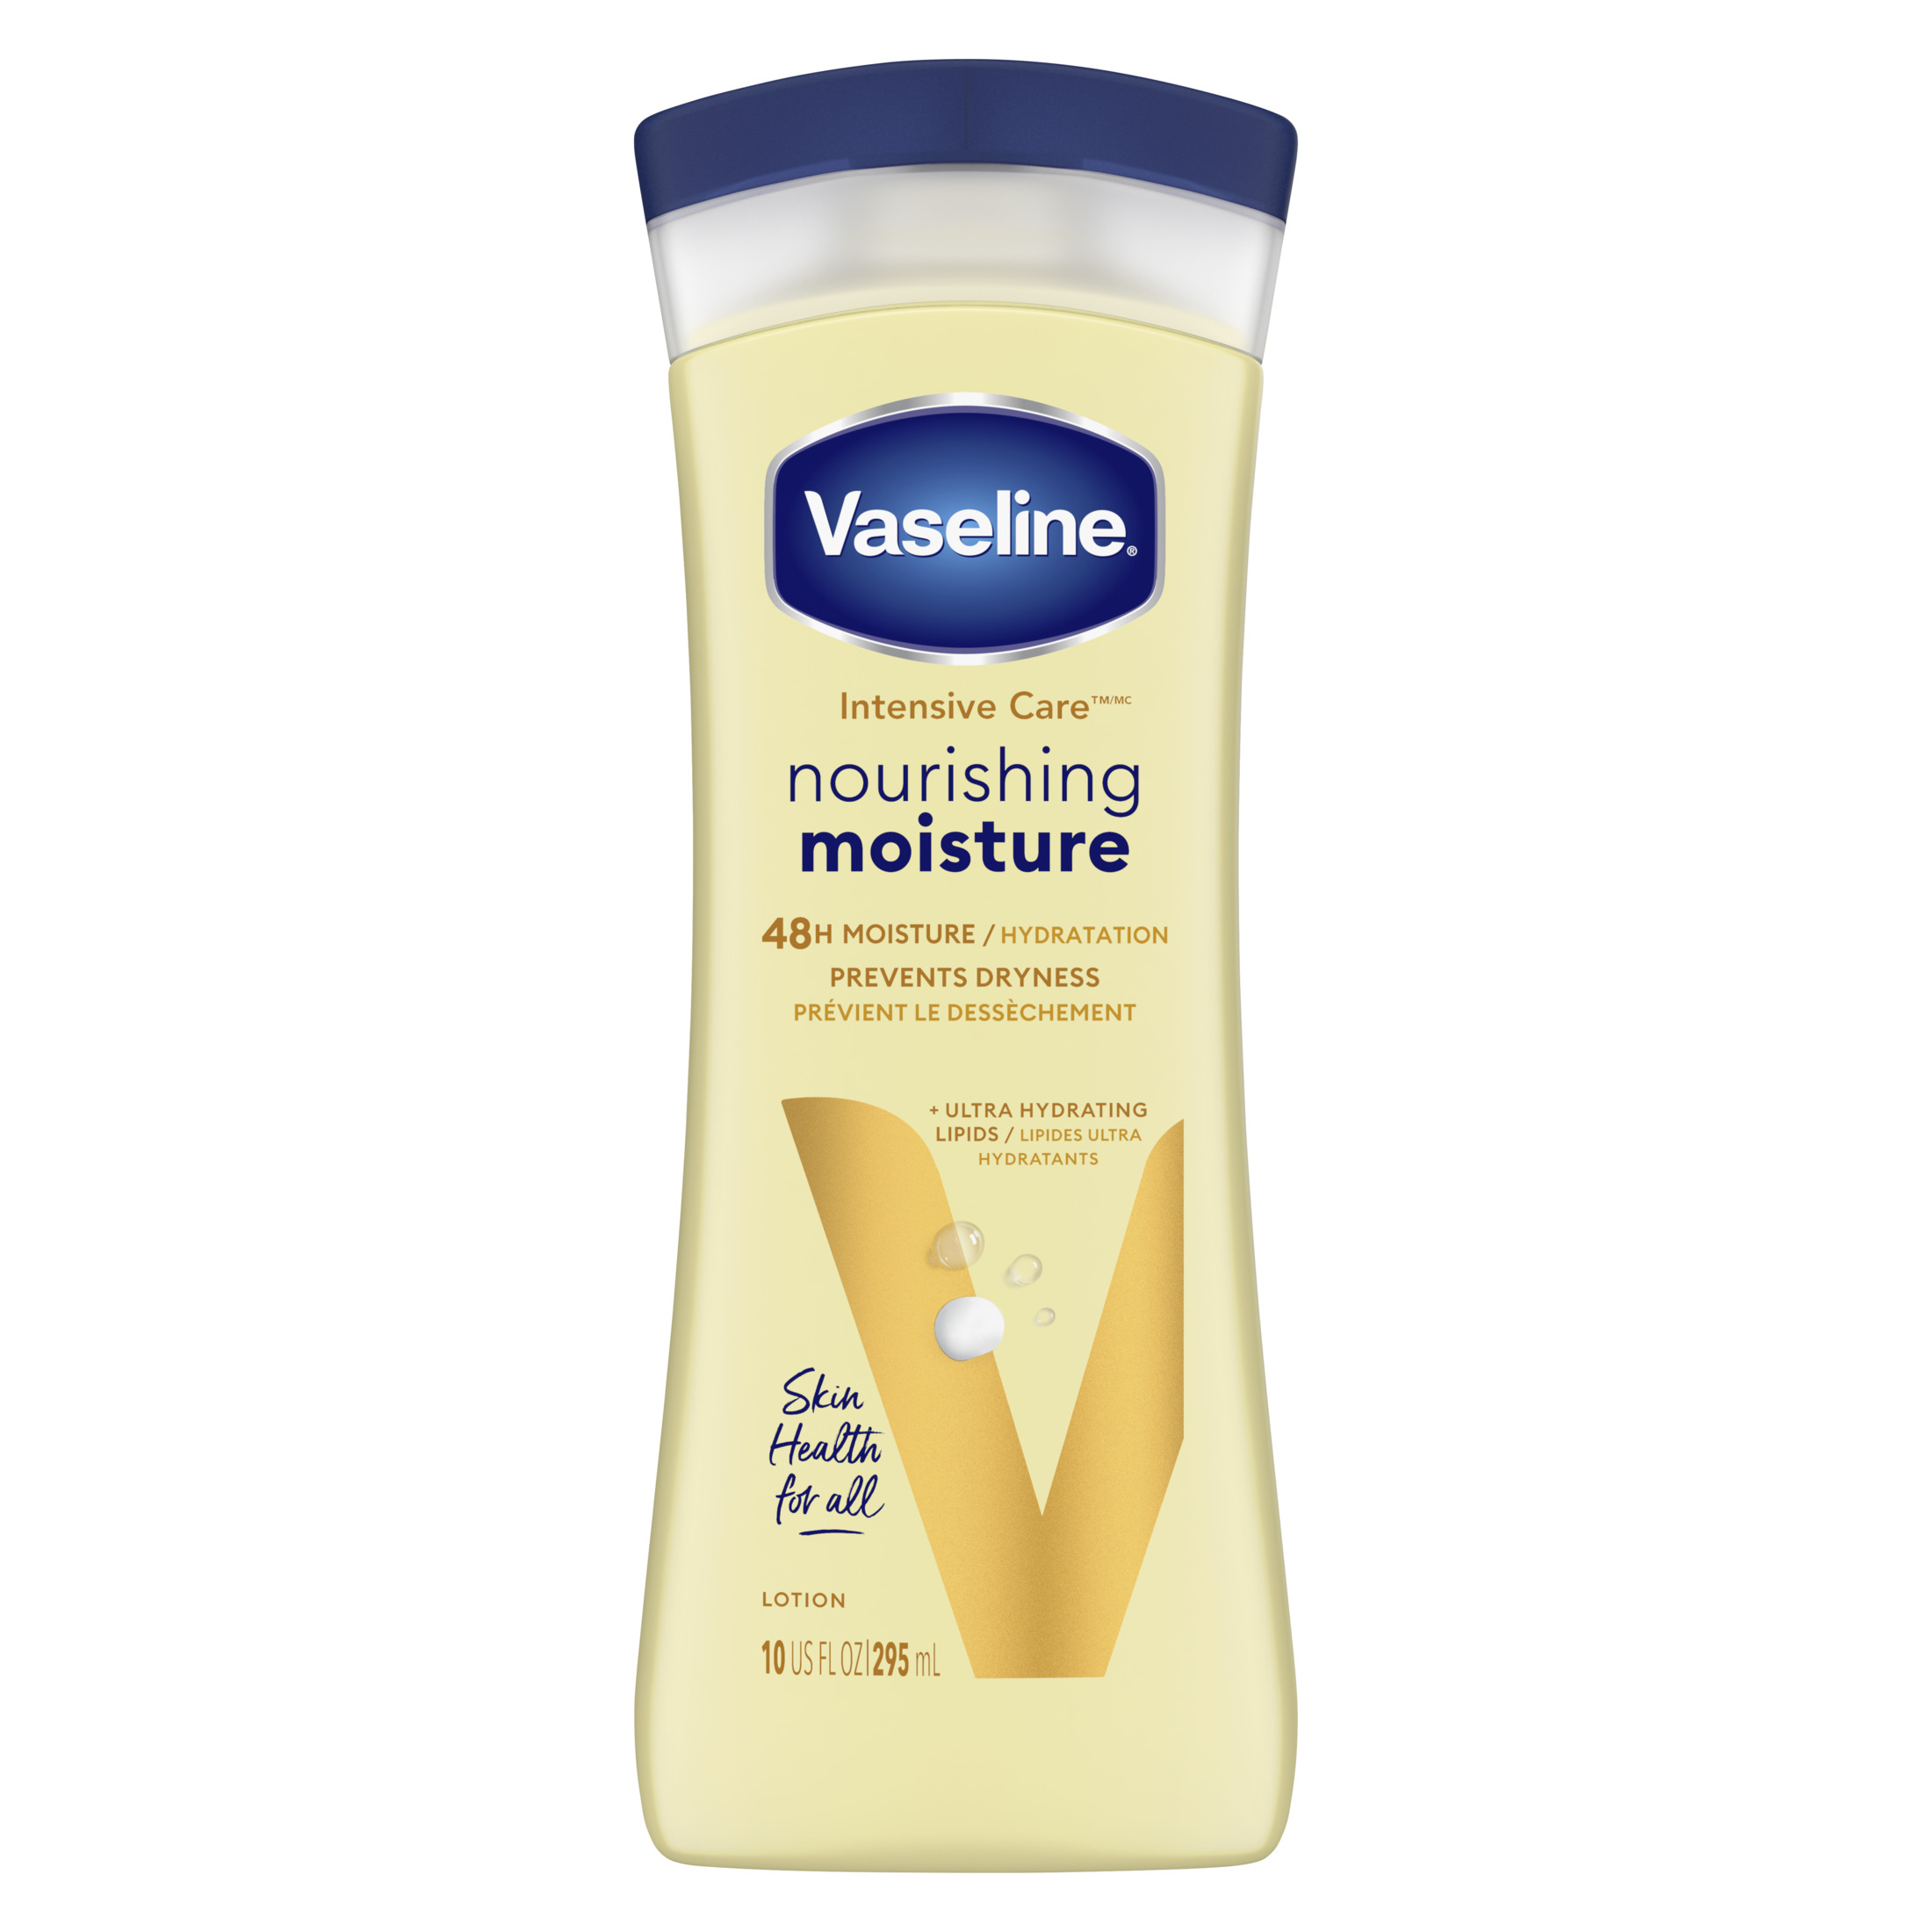 Vaseline Intensive Care Essential Healing Non Greasy Body Lotion All Skin Type, 10 fl oz - image 1 of 13